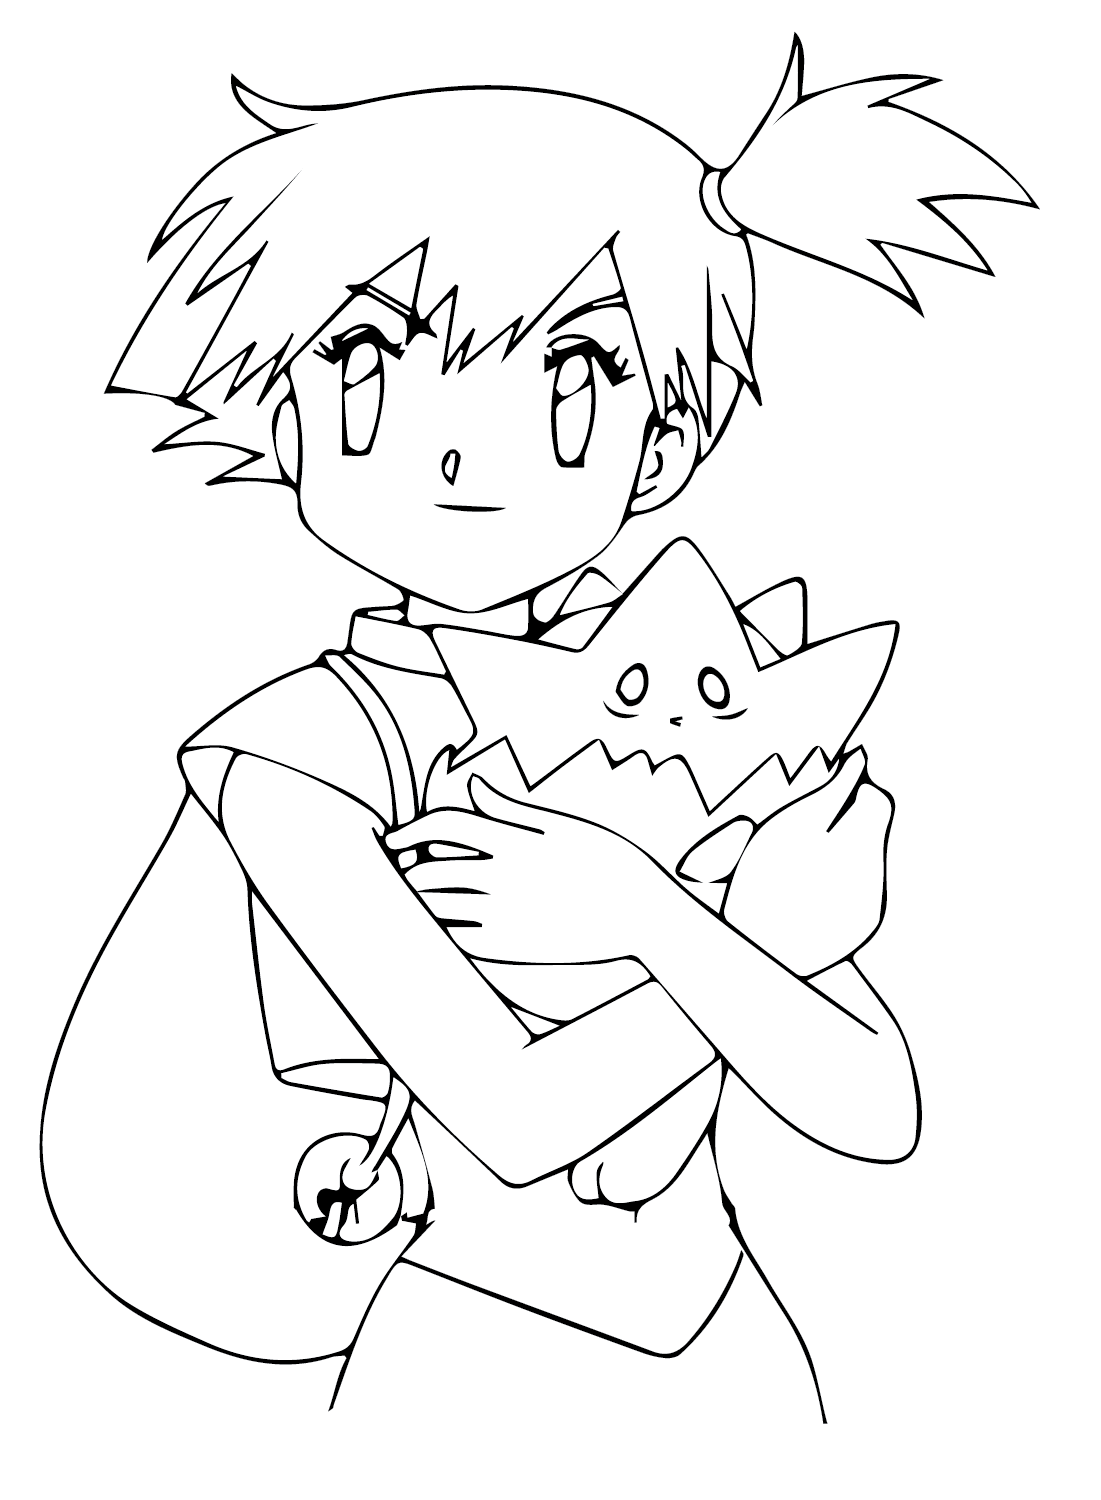 Misty Pokemon Coloring Page from Misty